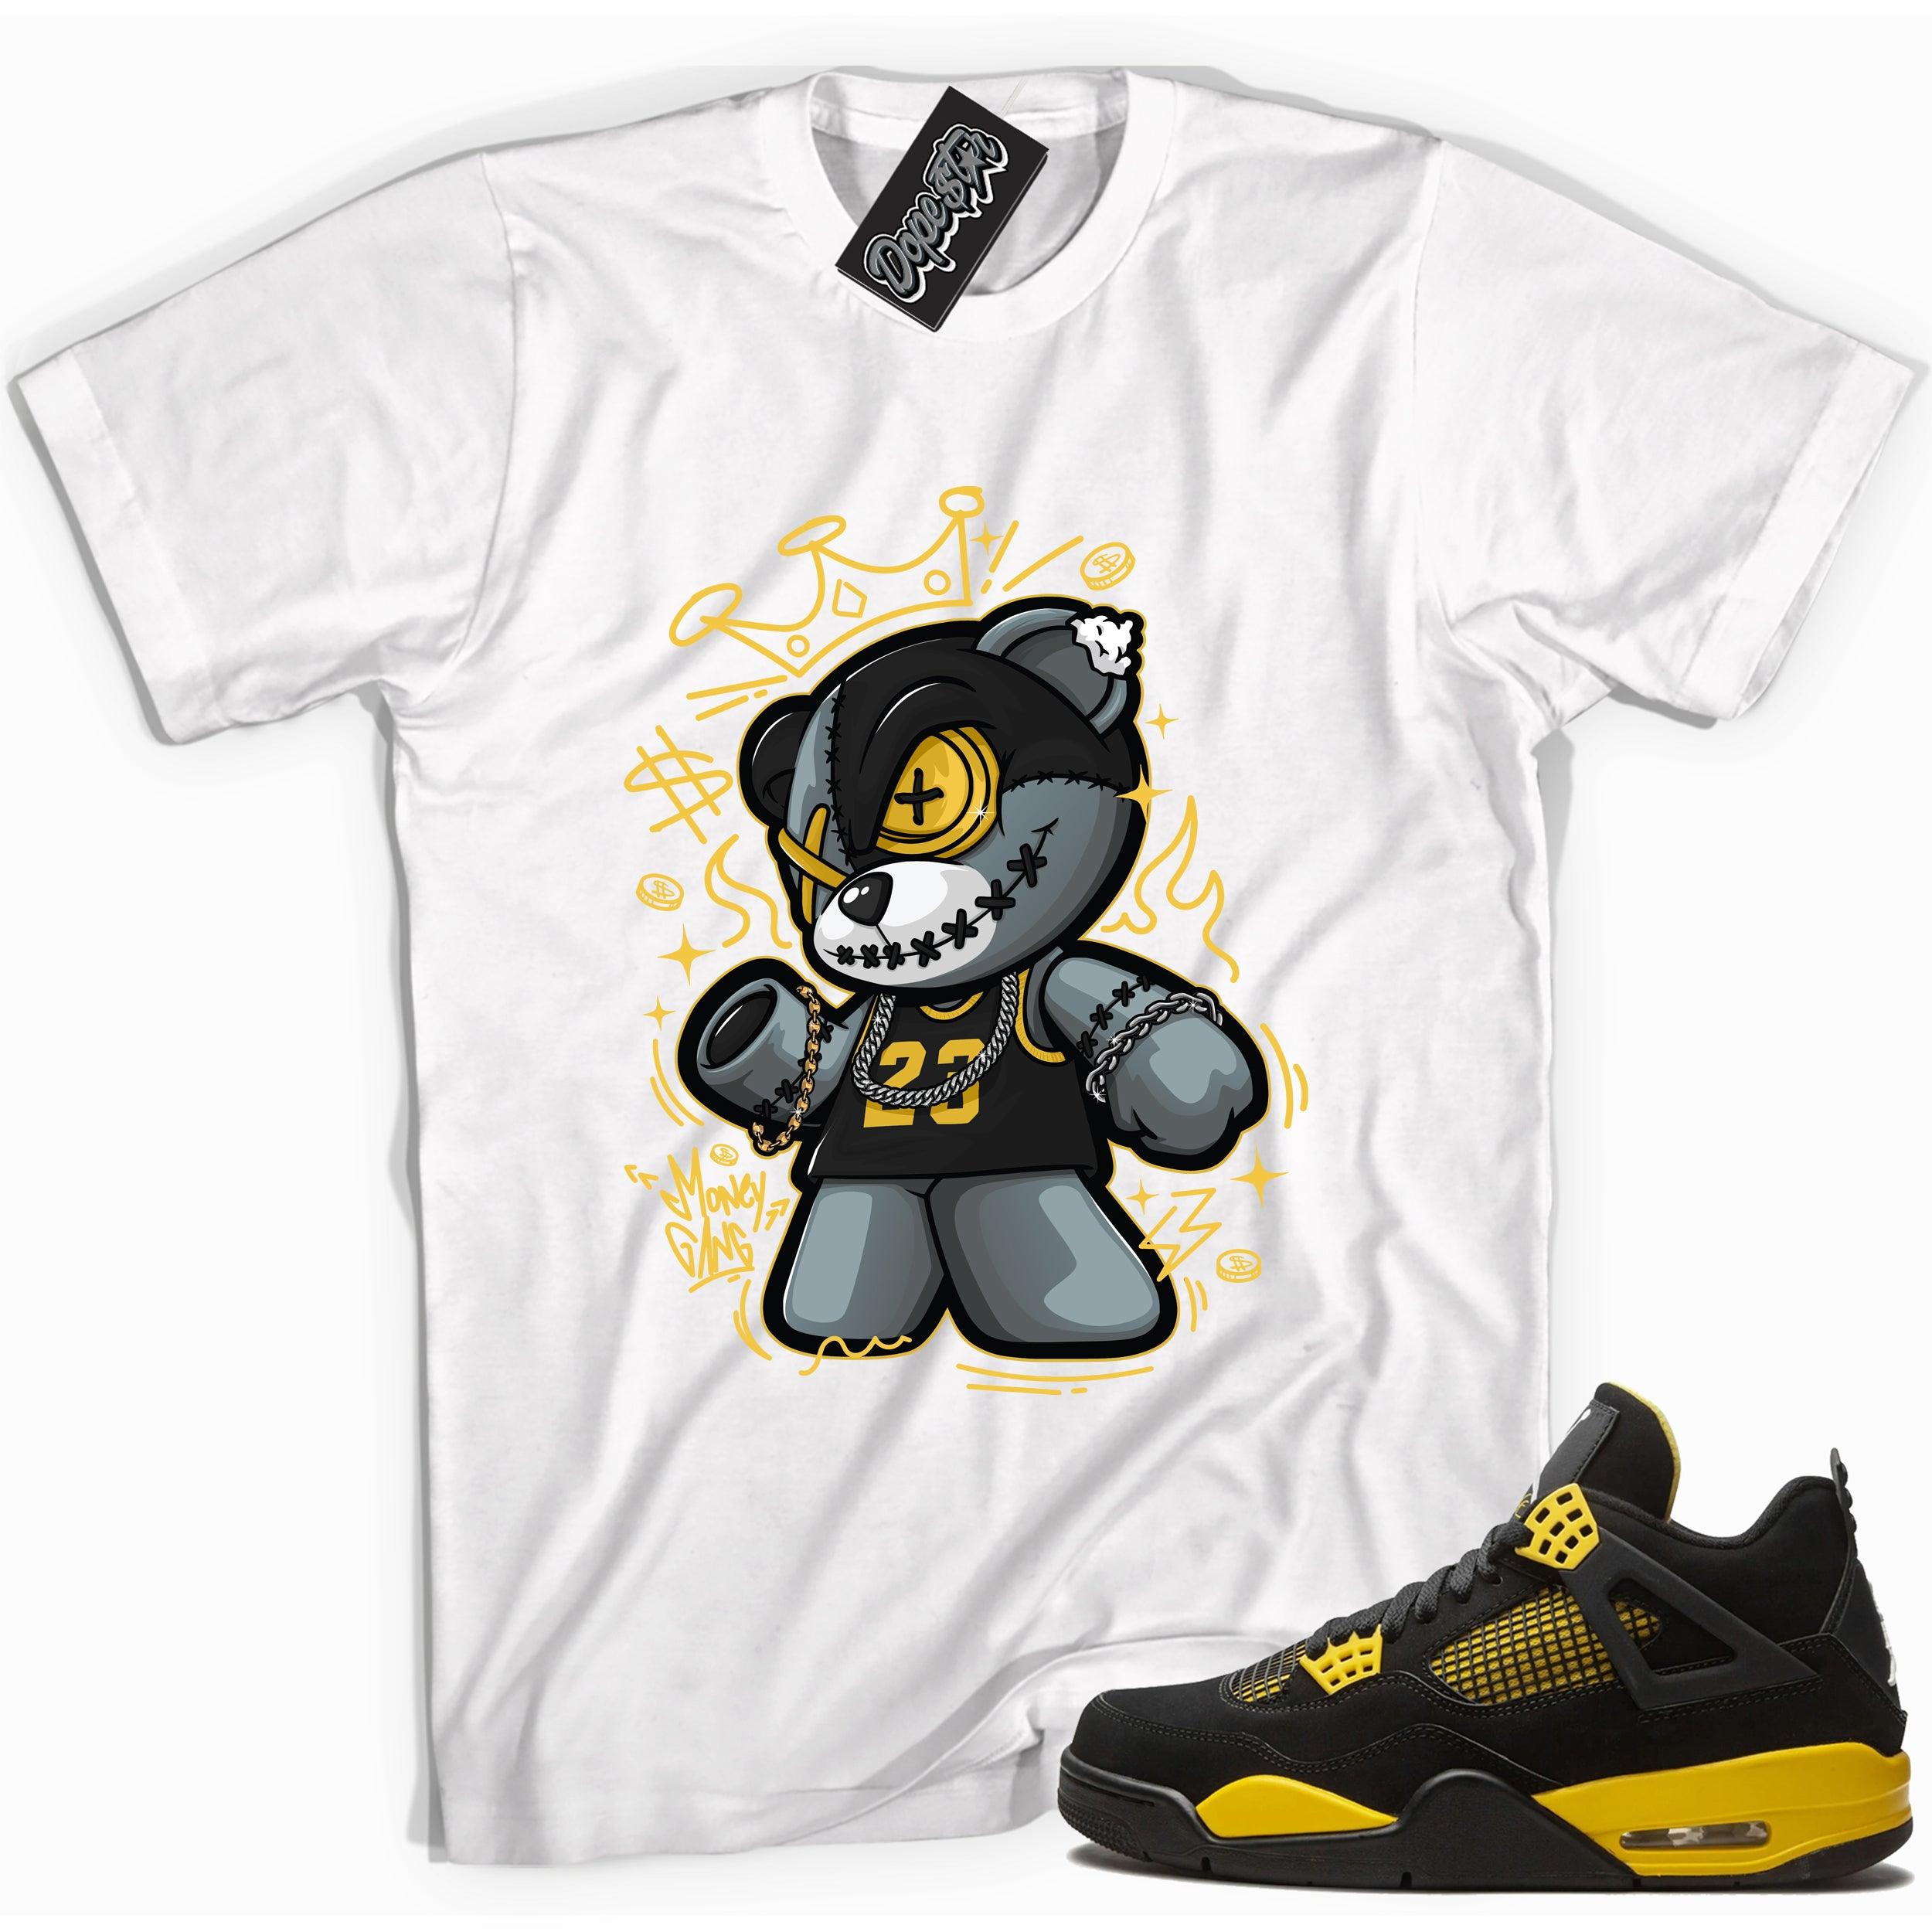 Cool white graphic tee with 'money gang bear' print, that perfectly matches Air Jordan 4 Thunder sneakers